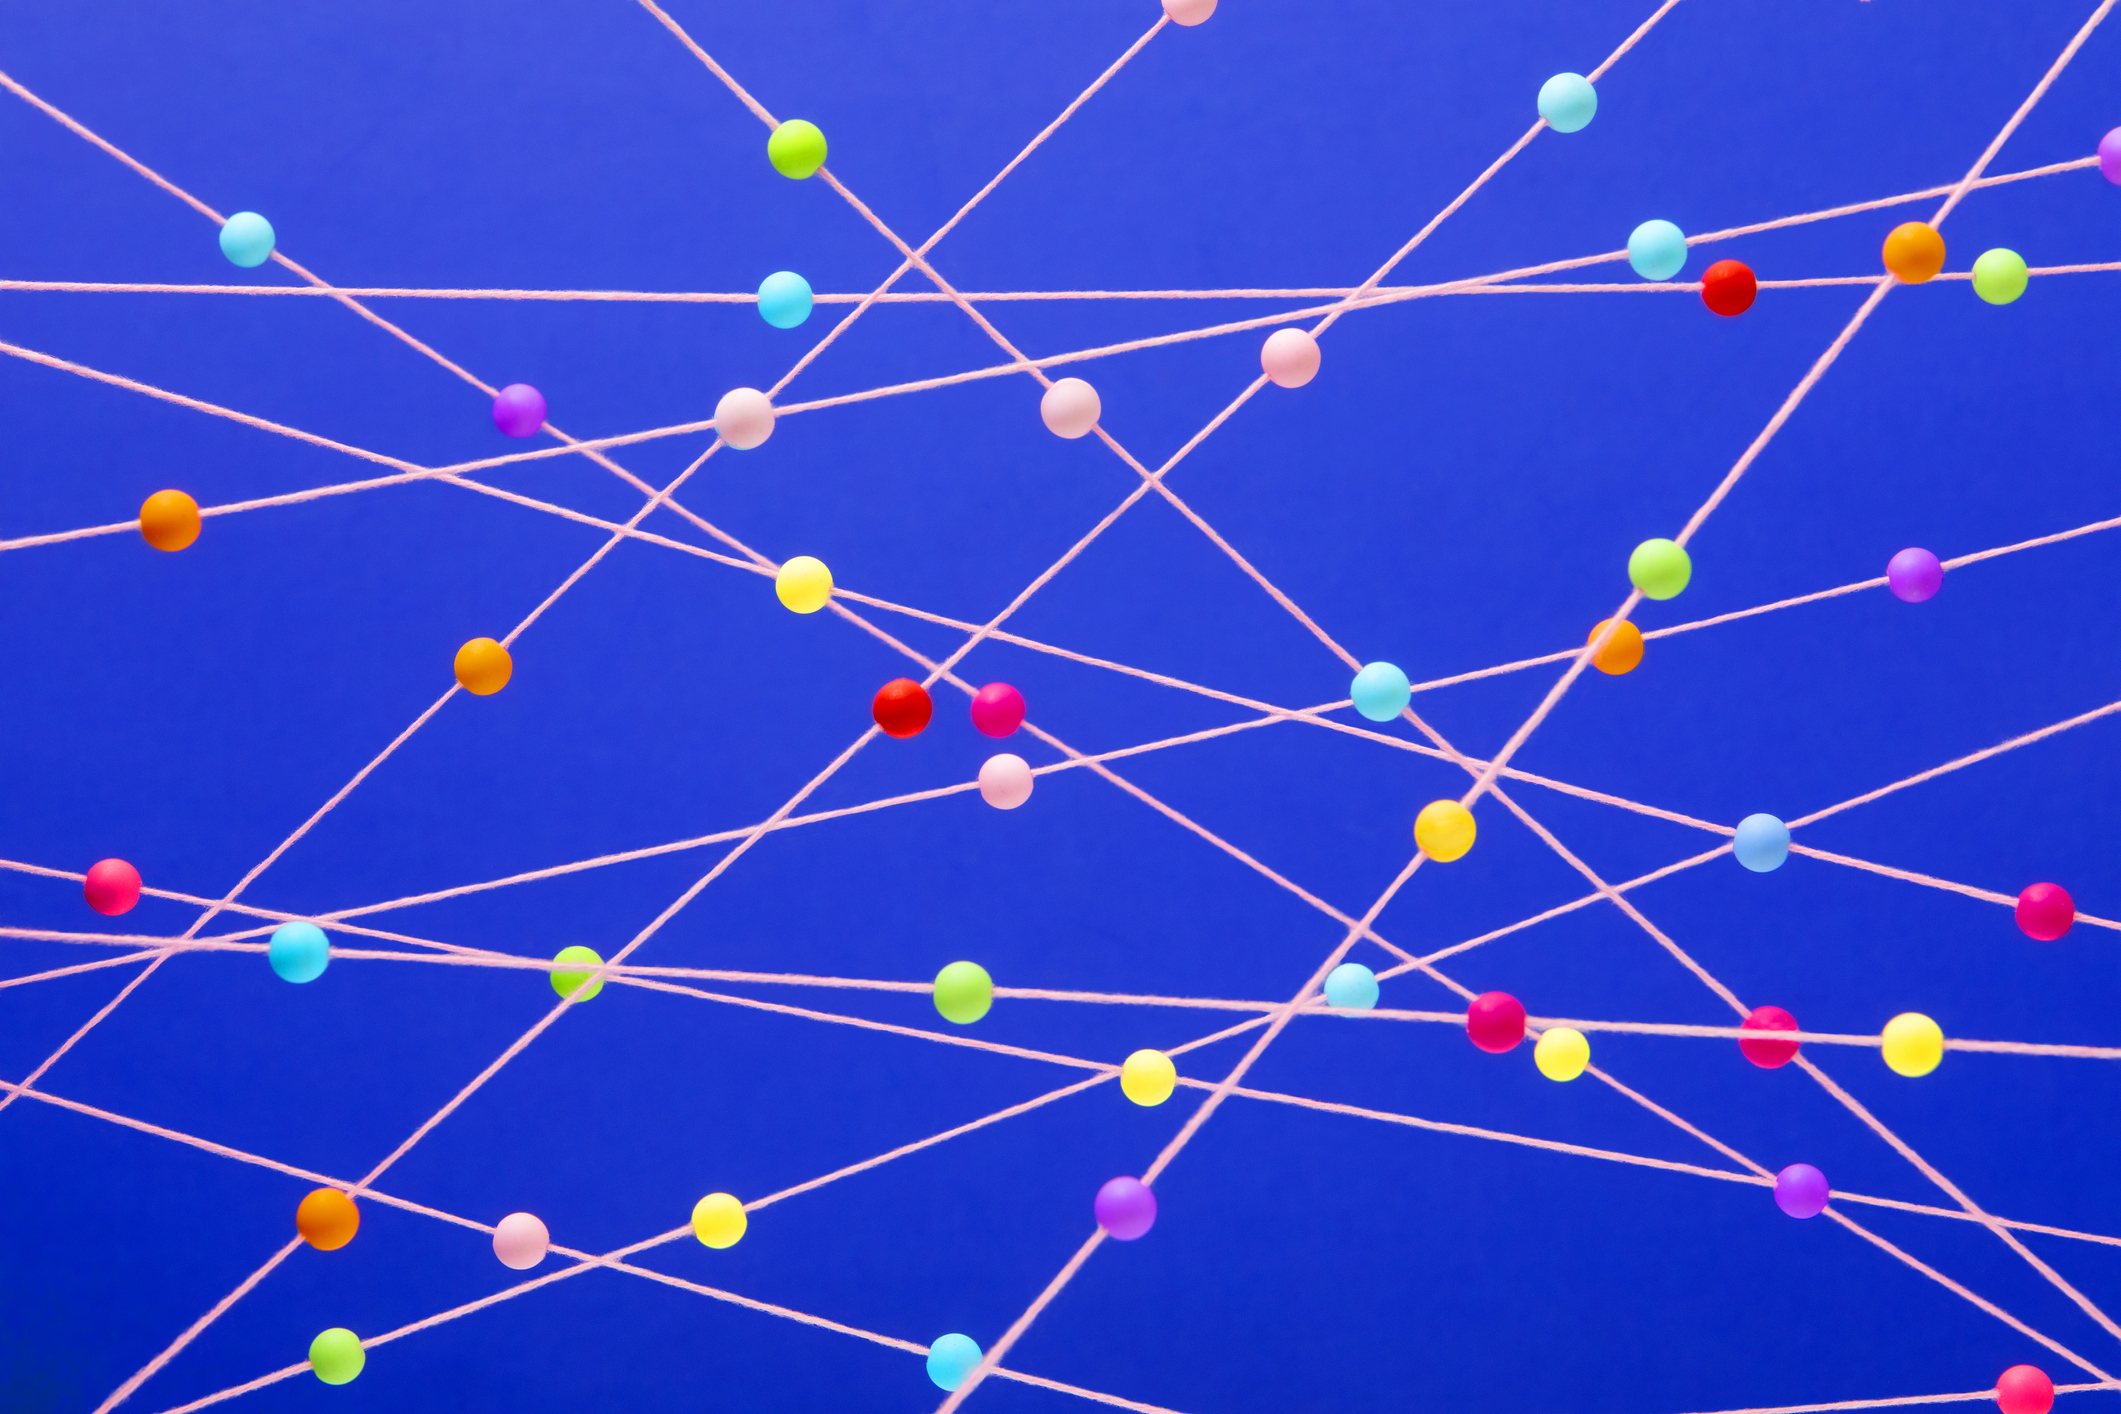 Bright multicolored balls randomly arranged on pink strings blue background, used in post about Betterdata